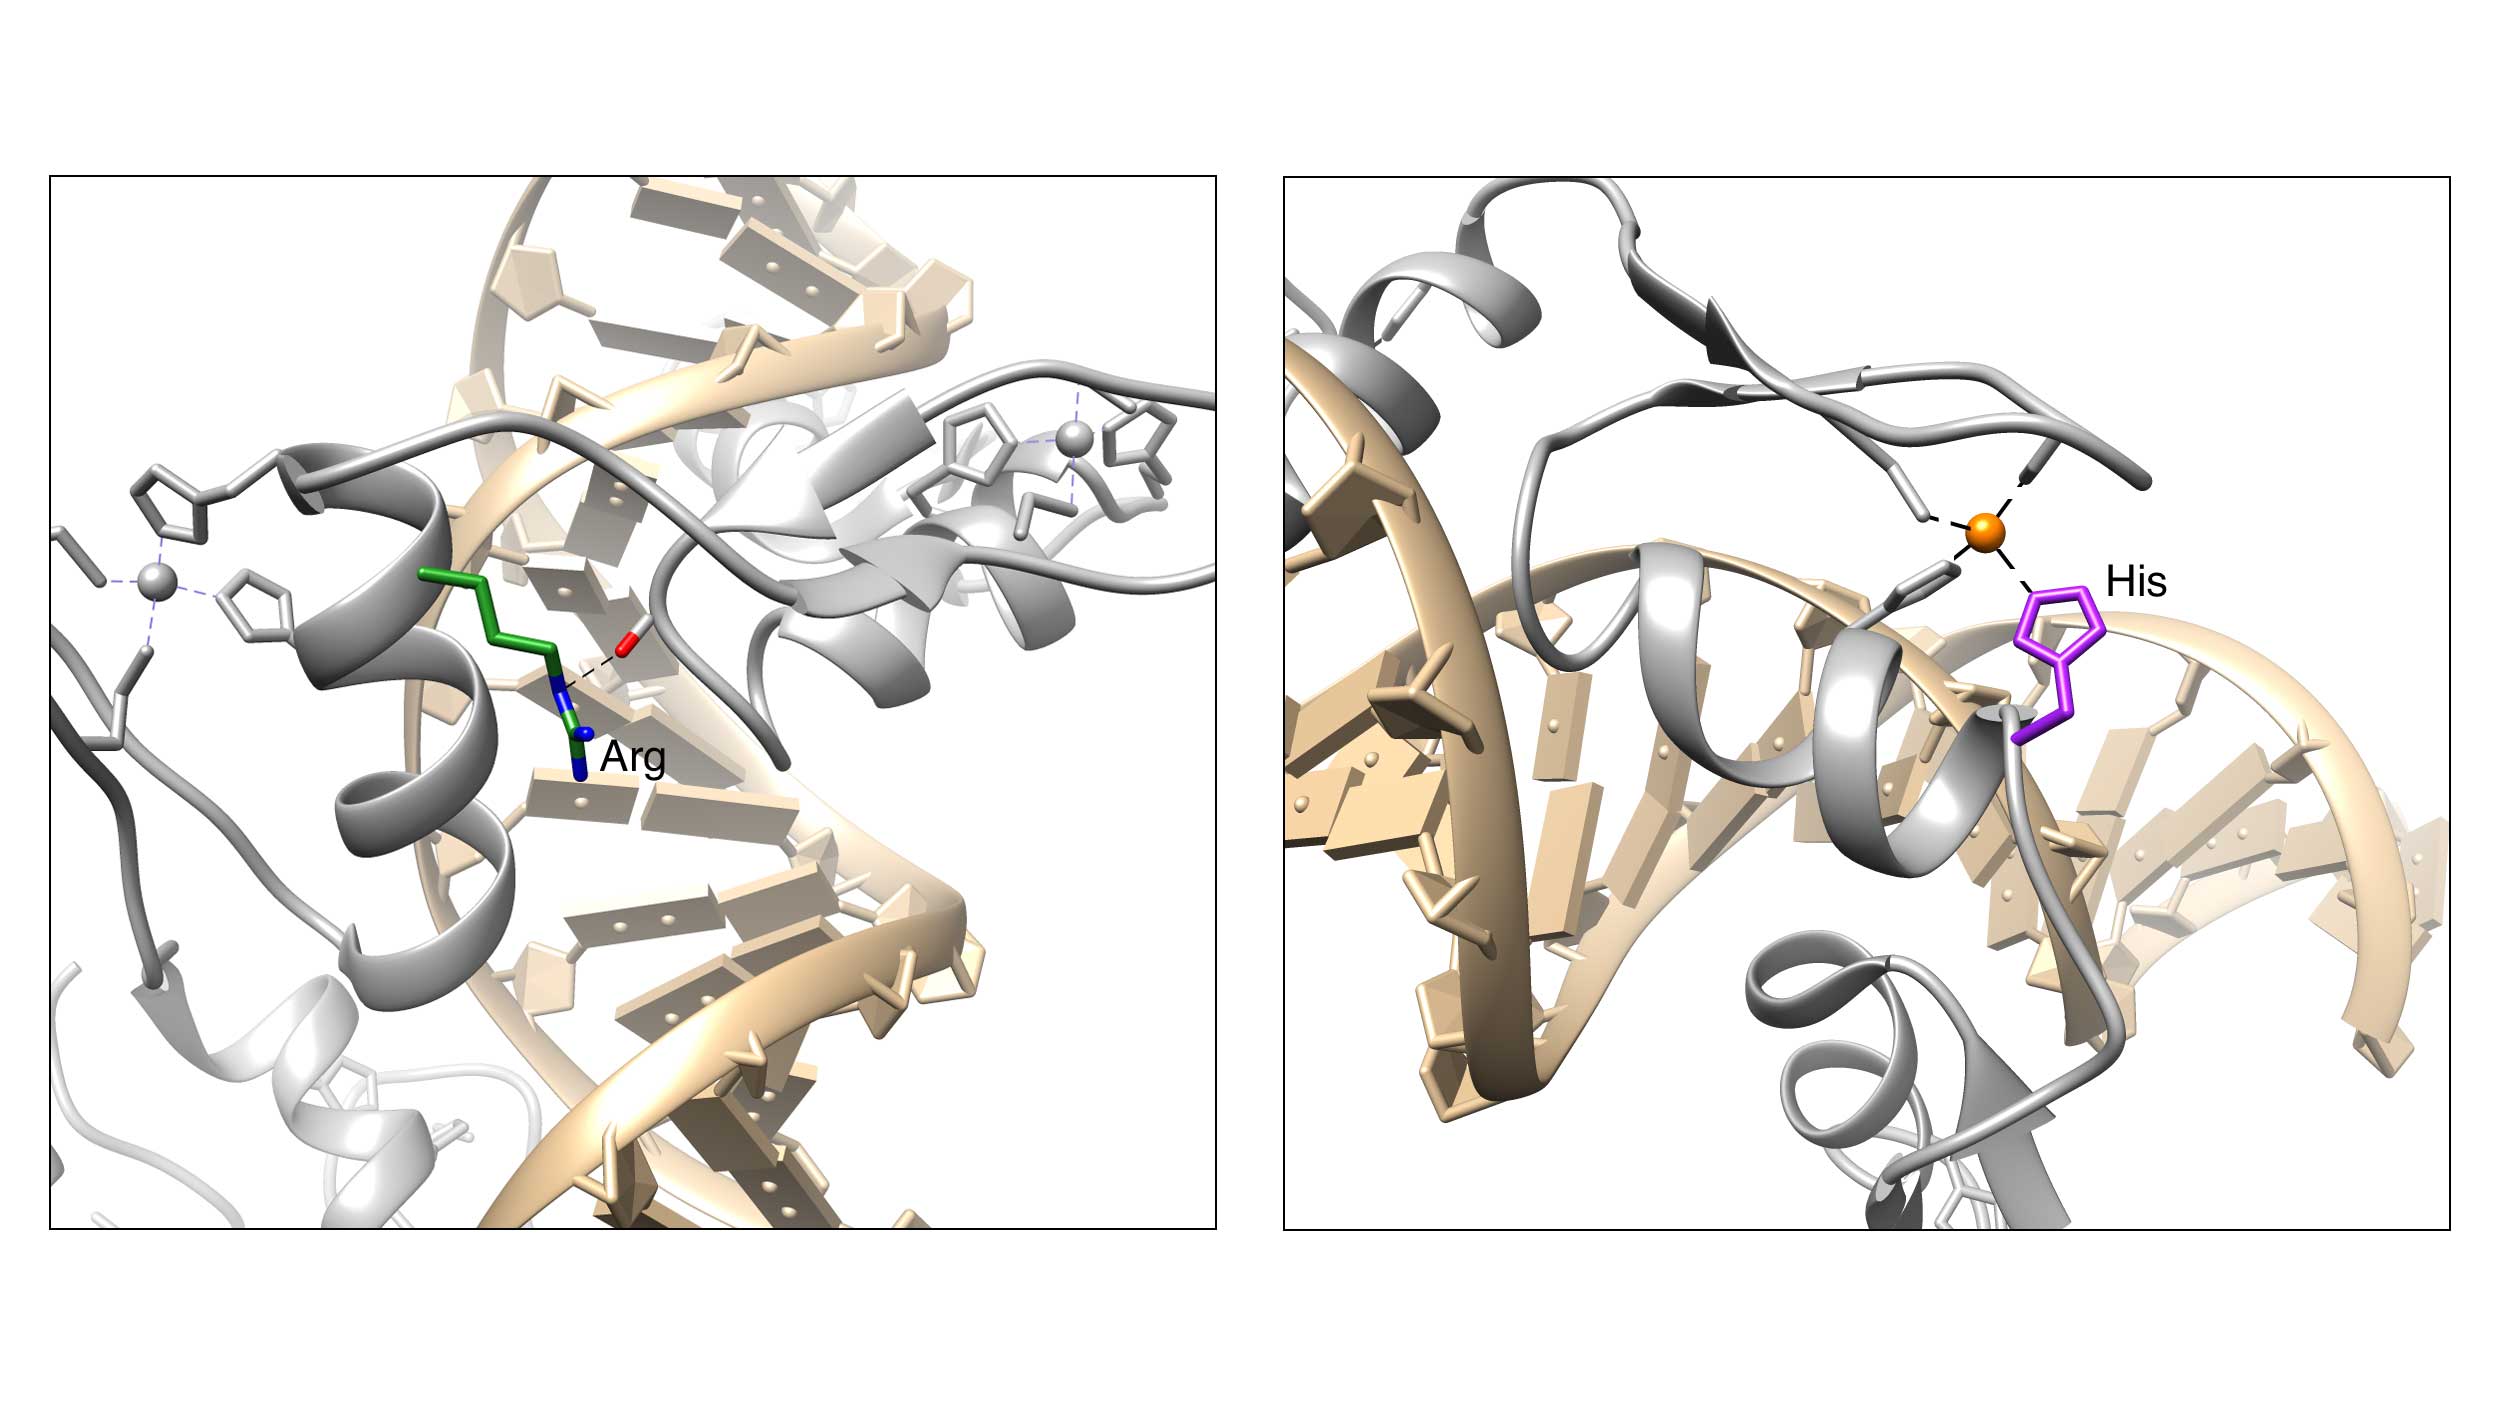 Image of proteins